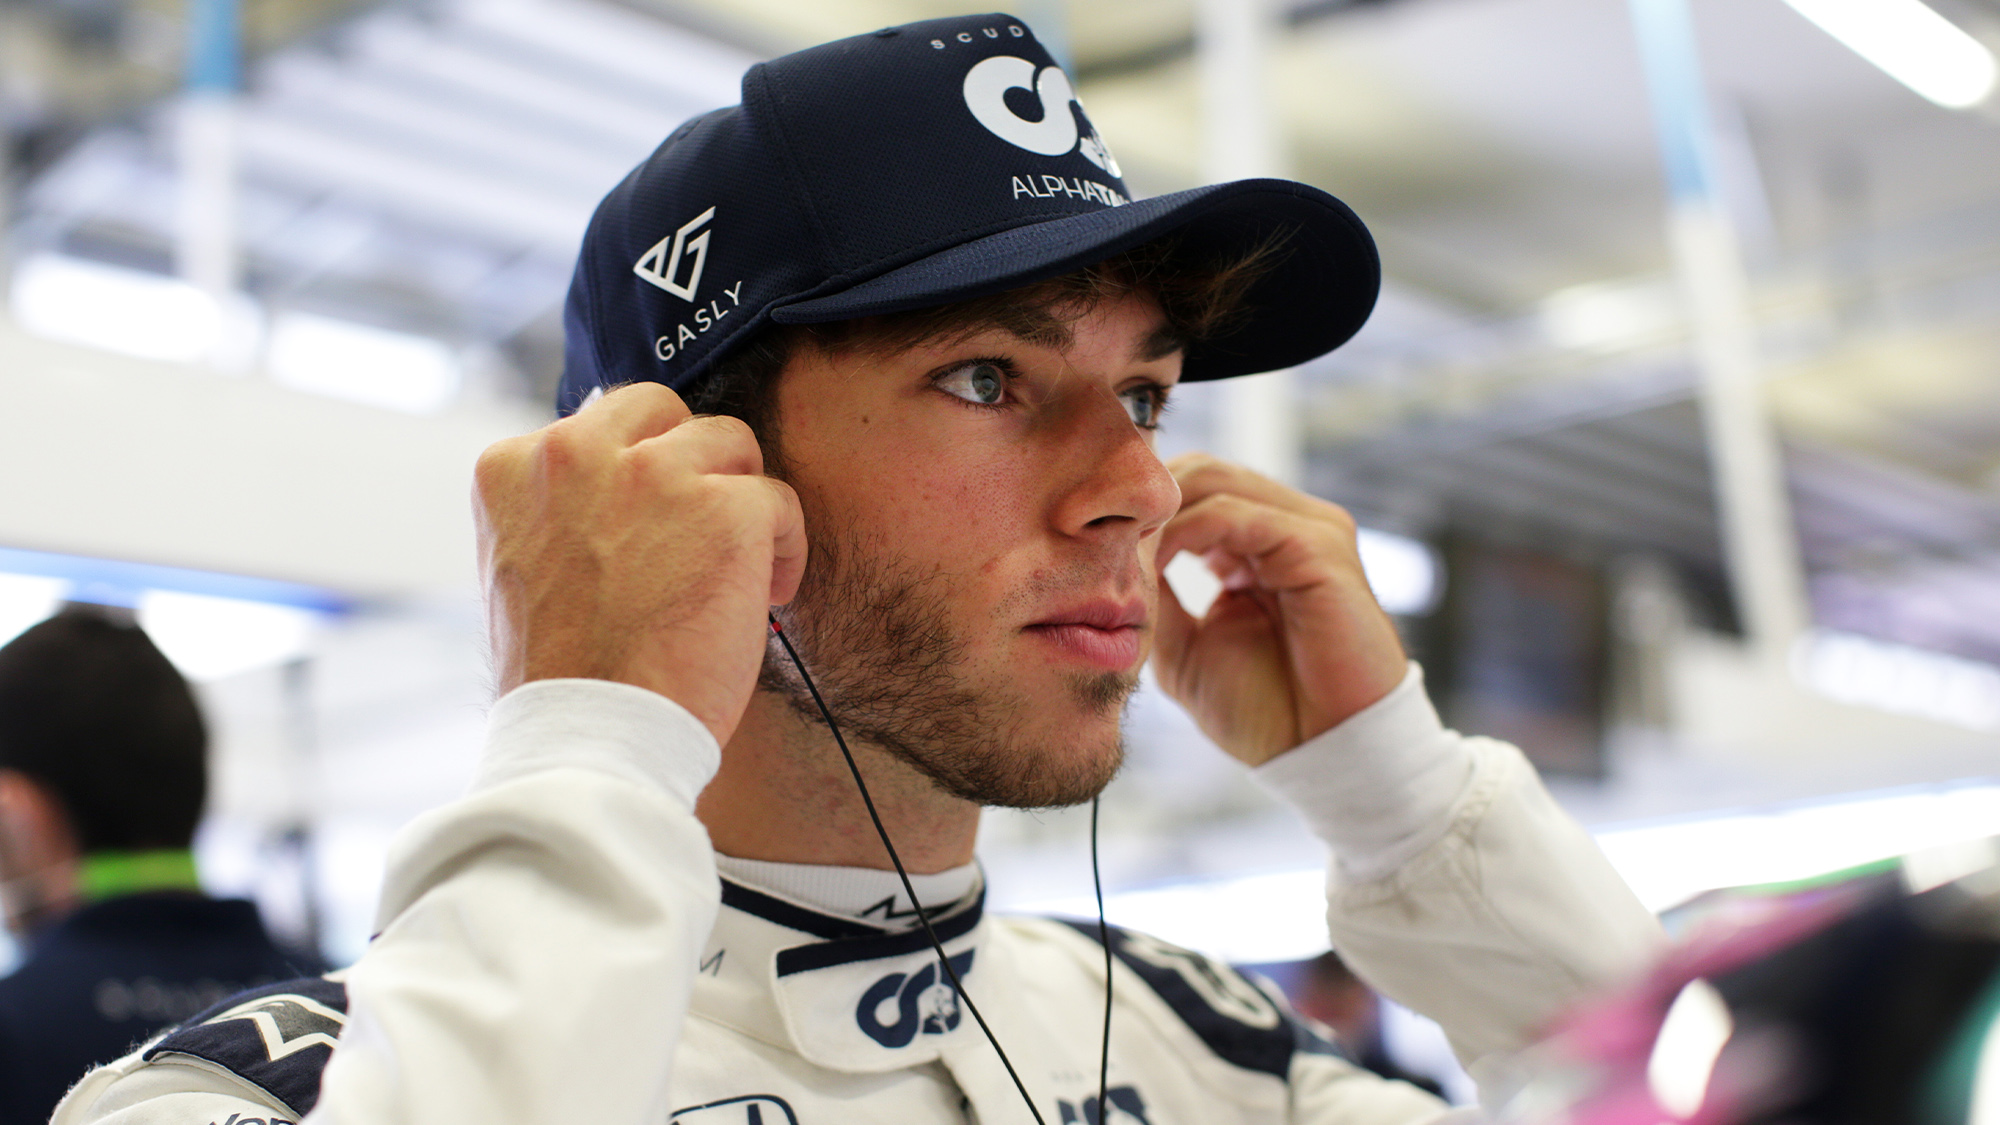 Formula 1: End of SPECULATION! Pierre Gasly extends CONTRACT with AlphaTauri till 2023 amid McLaren rumours